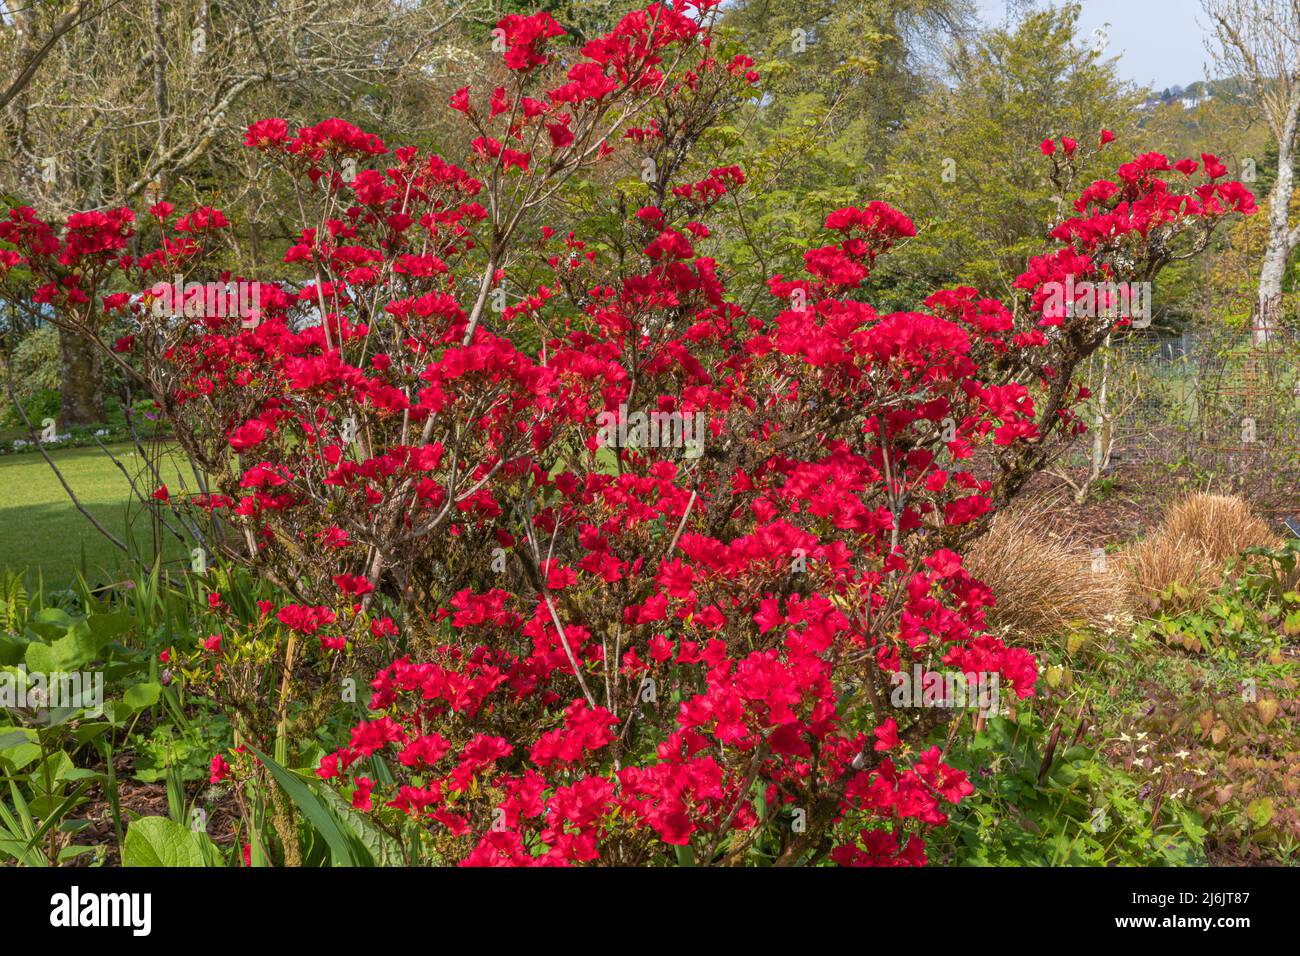 rich blood red flowers of the rhododendron shrub wards ruby, with the flower colors accentuated against the green leaves Stock Photo